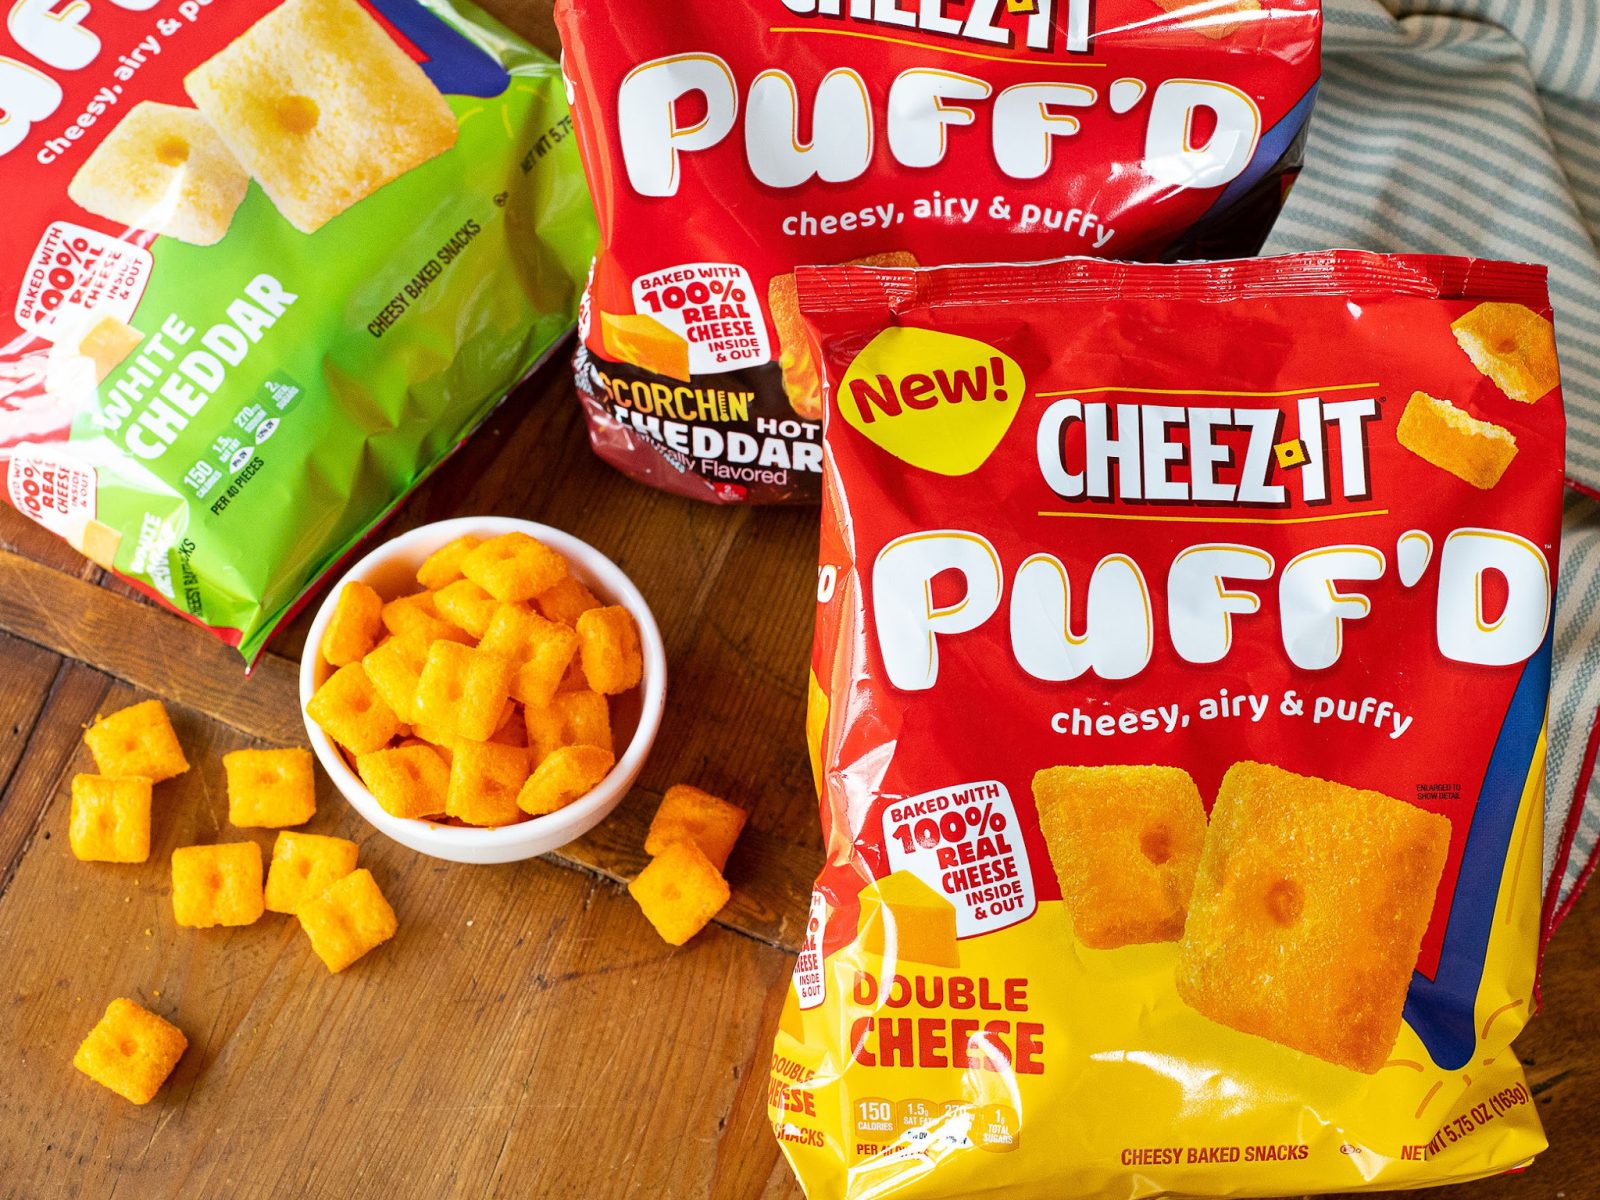 Cheez-It Puff’d Snacks As Low As $1.24 At Kroger